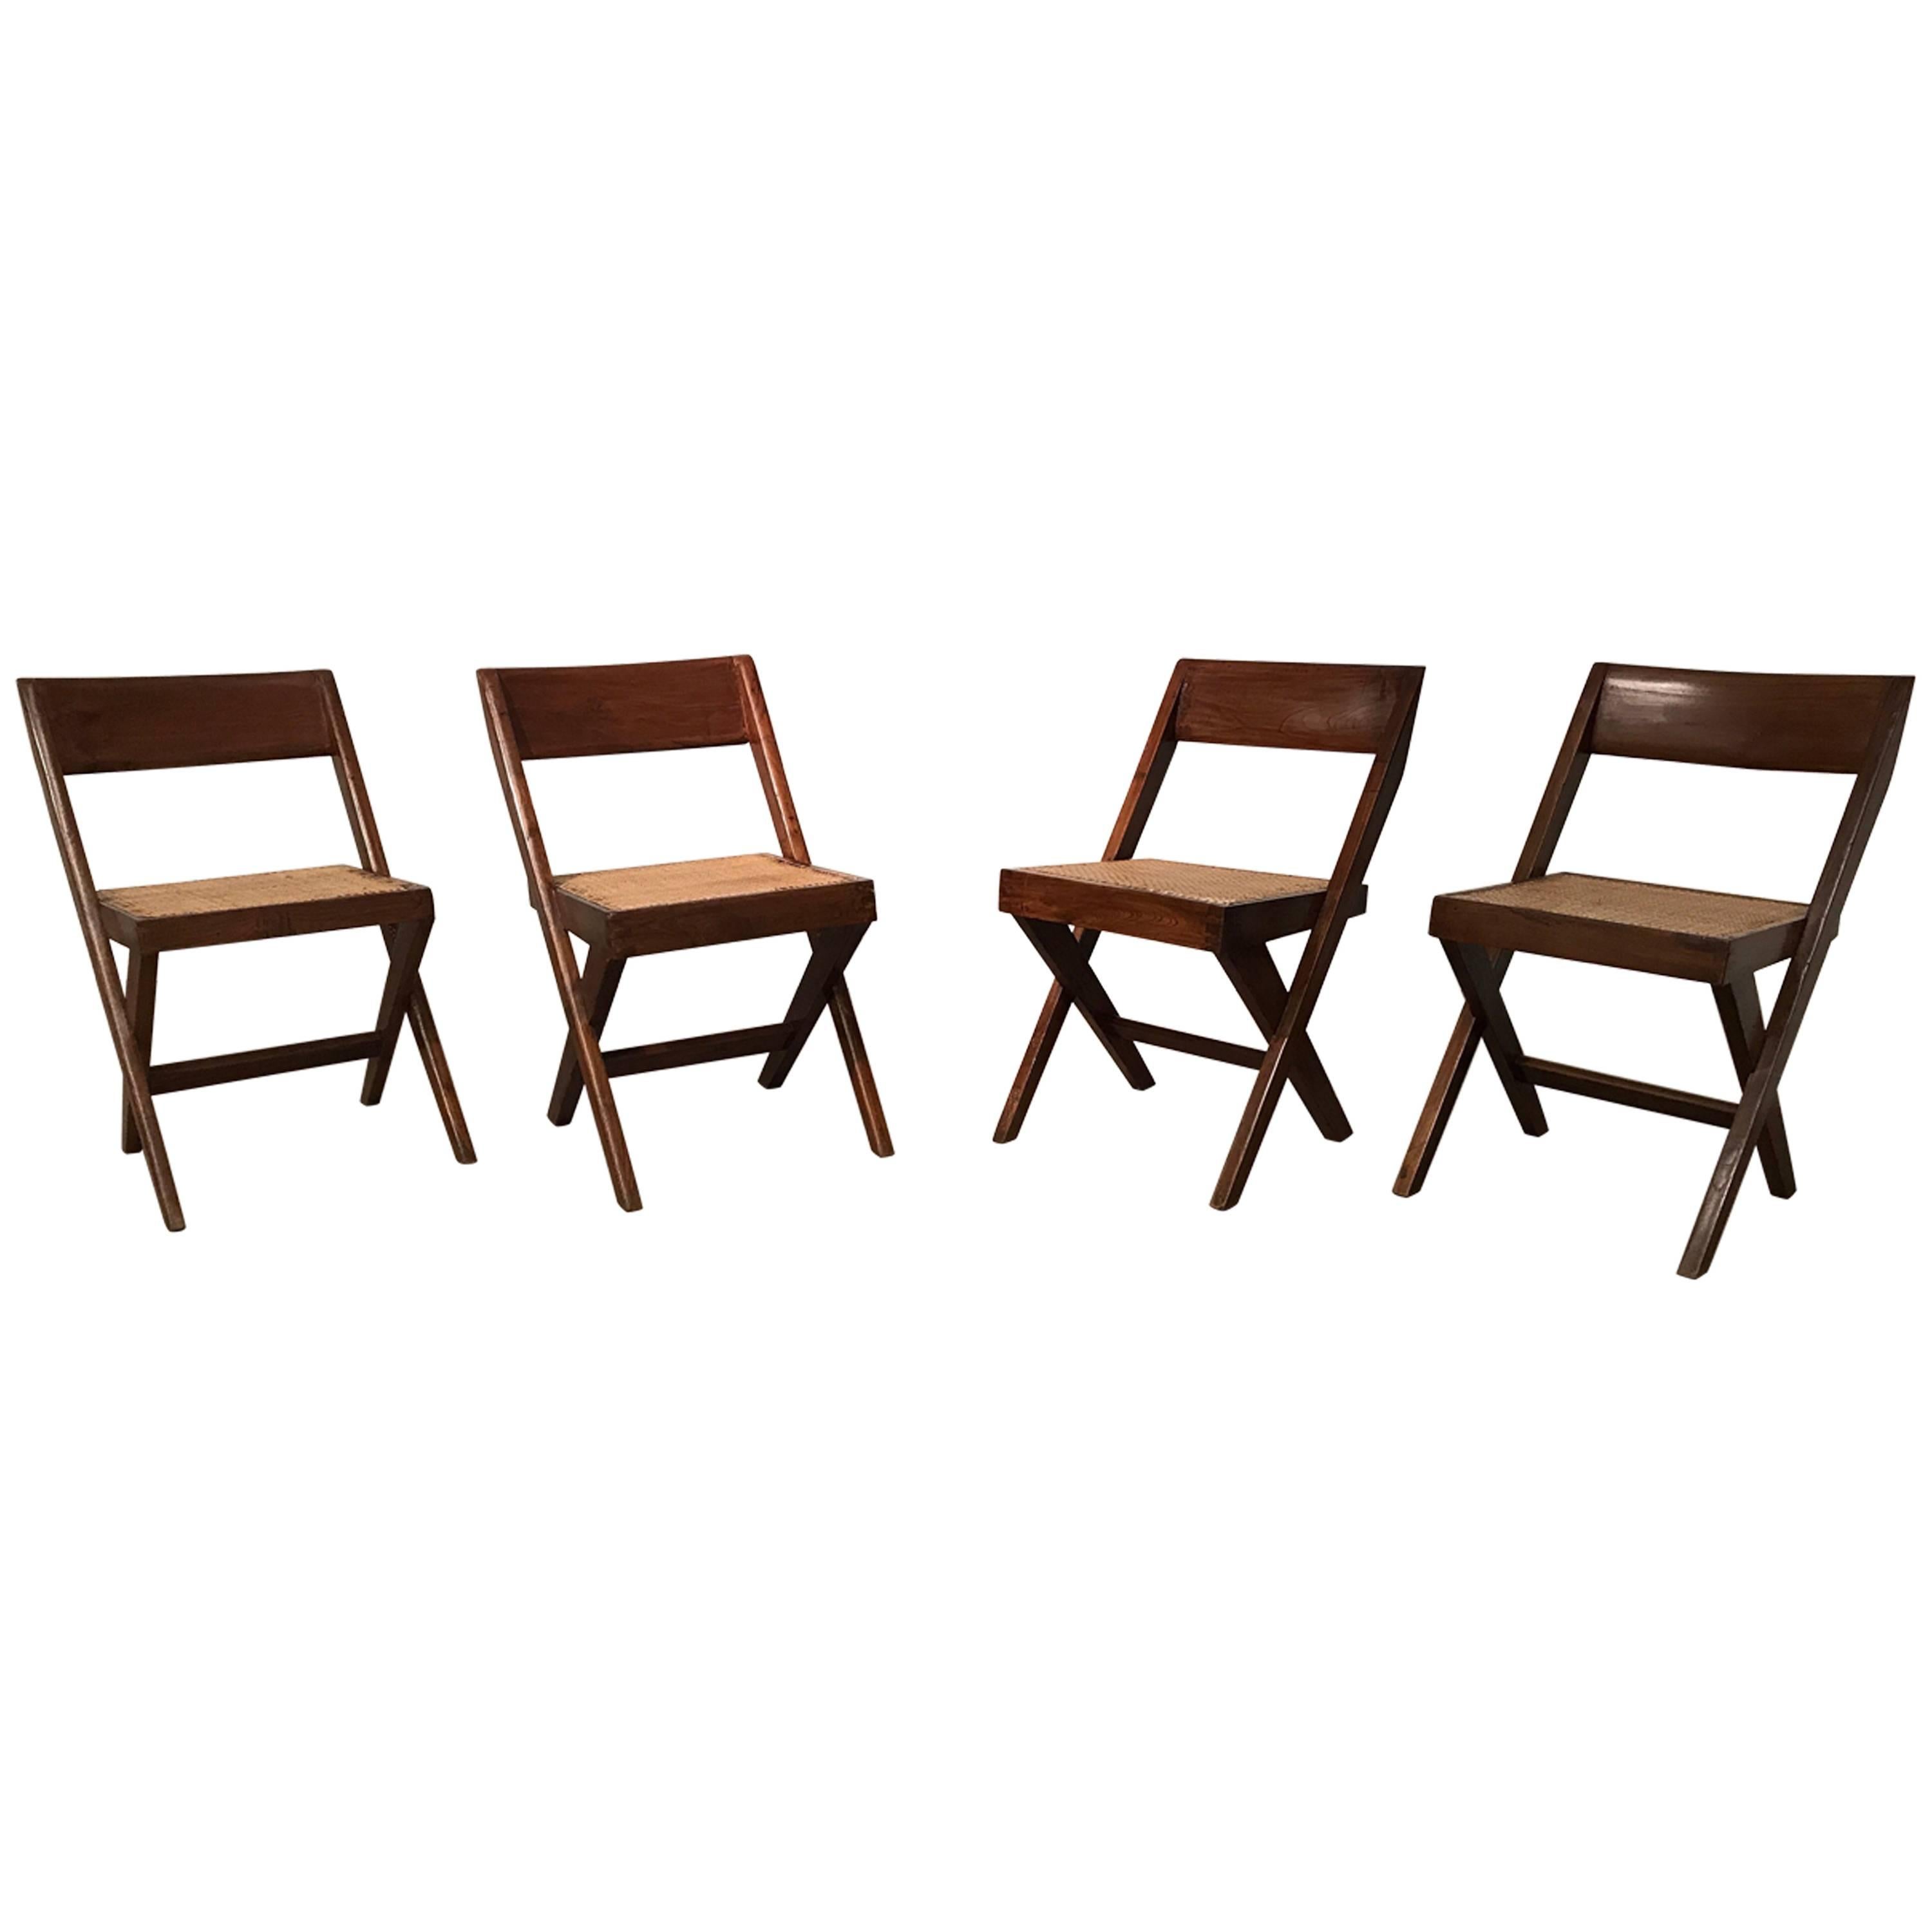 Set of six teak library chairs designed by Pierre Jeanneret for the Central Library of Punjab University, Chandigarh. Solid lacquered teak frame with woven cane seat. 
Provenance: Central Library of Punjab University, Chandigarh, India / Private